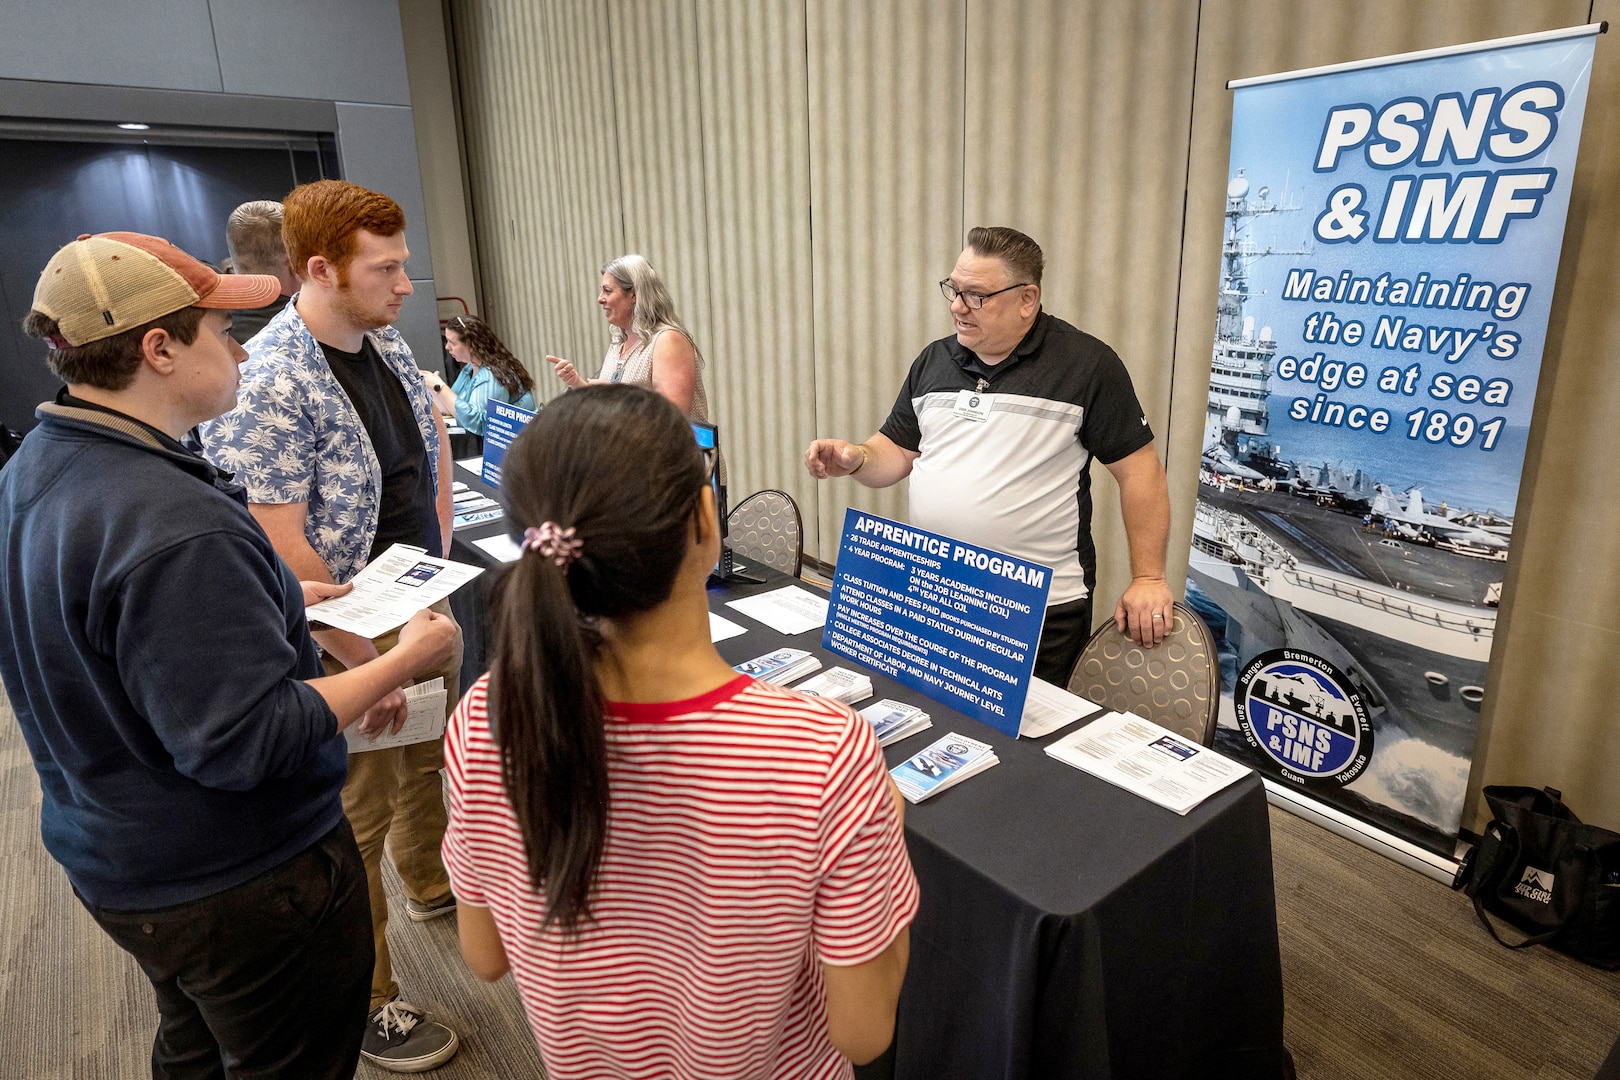 Dirk Johnson, work study and student program analyst, Puget Sound Naval Shipyard & Intermediate Maintenance Facility Apprentice Program, talks with a group of job candidates June 7, 2023, during the PSNS & IMF Hiring Fair at the Kitsap Conference Center in Bremerton, Washington. More than 400 job offers were extended to job seekers during the two-day event. (U.S. Navy photo by Scott Hansen)